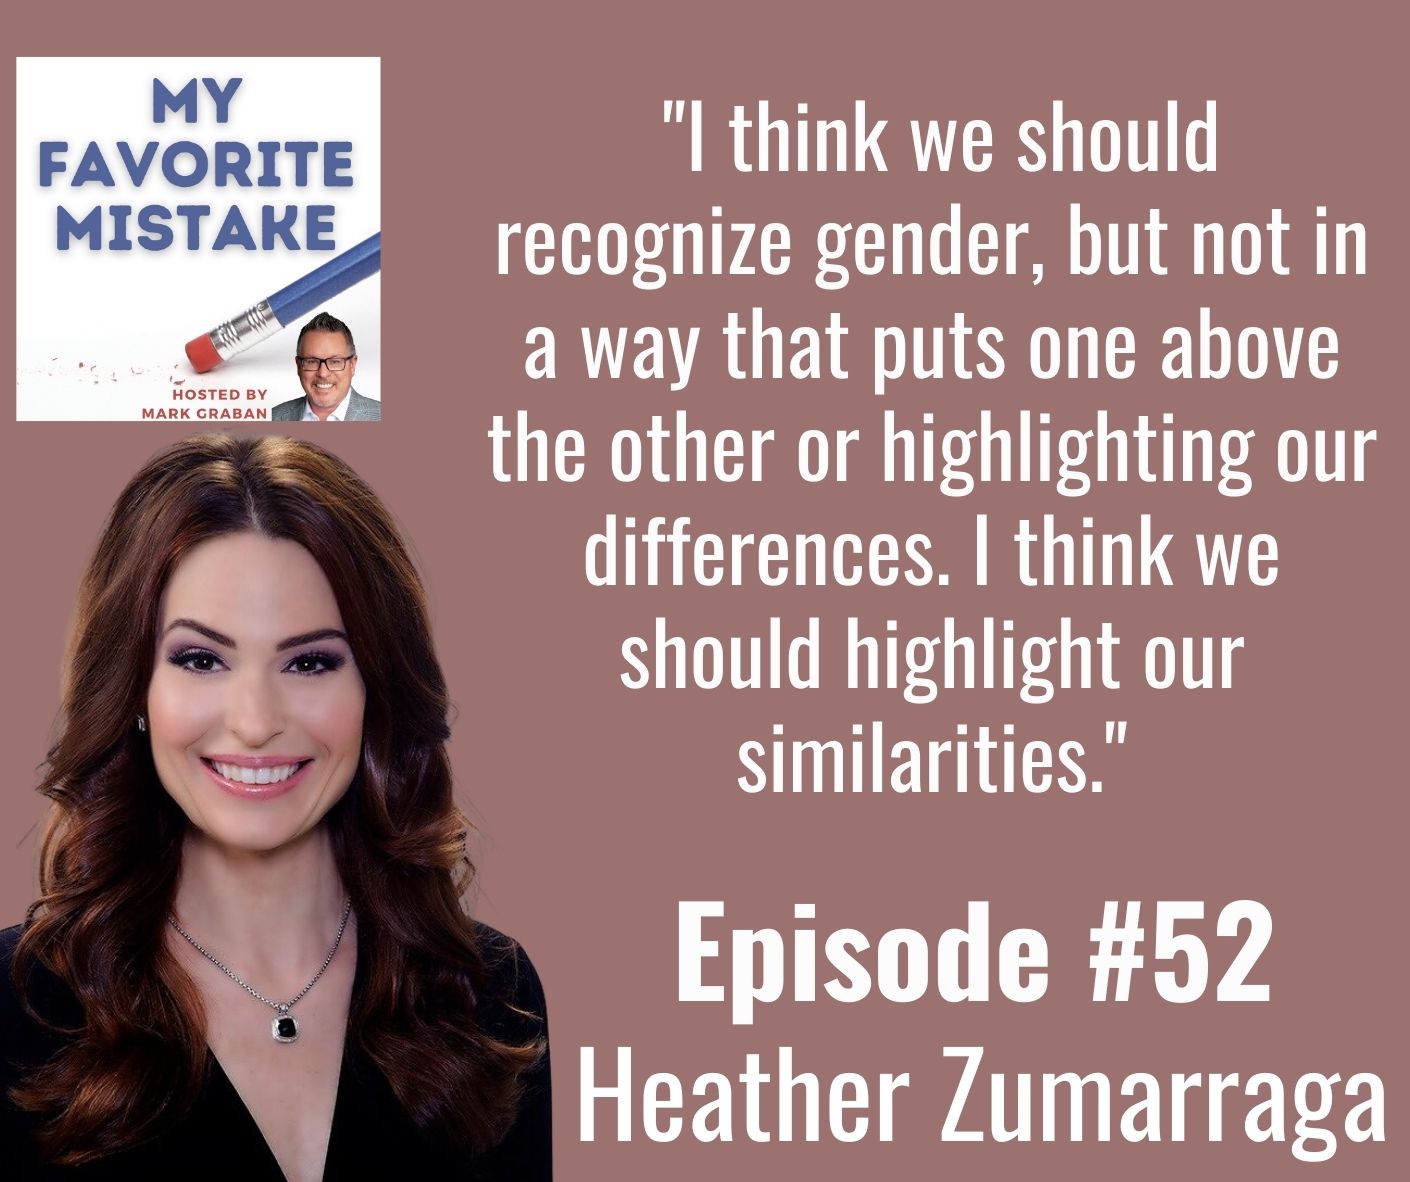  "I think we should recognize gender, but not in a way that puts one above the other or highlighting our differences. I think we should highlight our similarities."